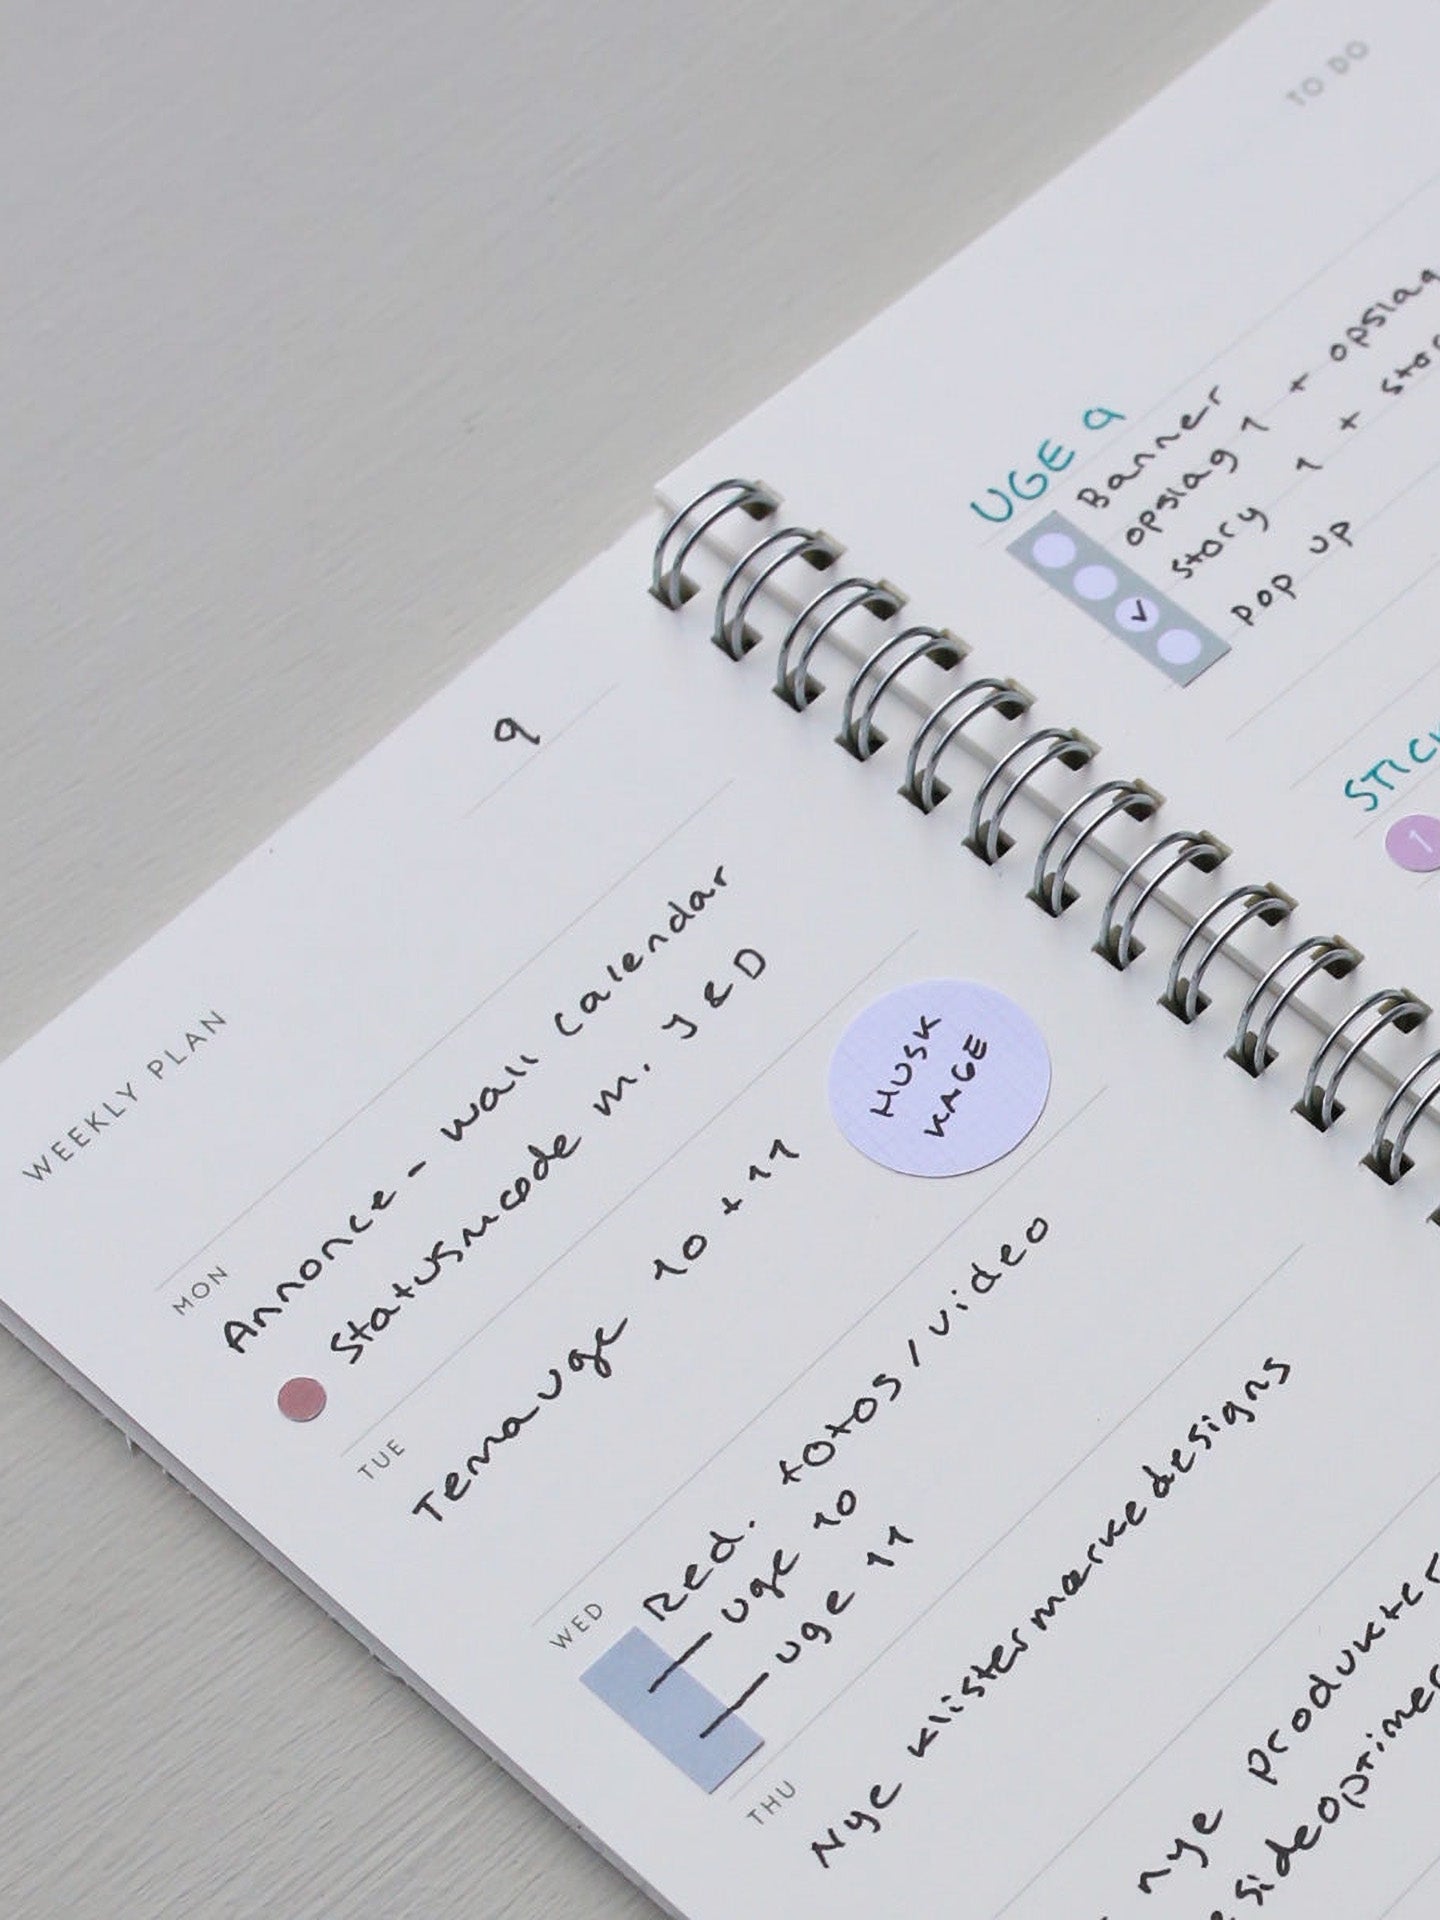 Wire-O Weekly Planner Notebook